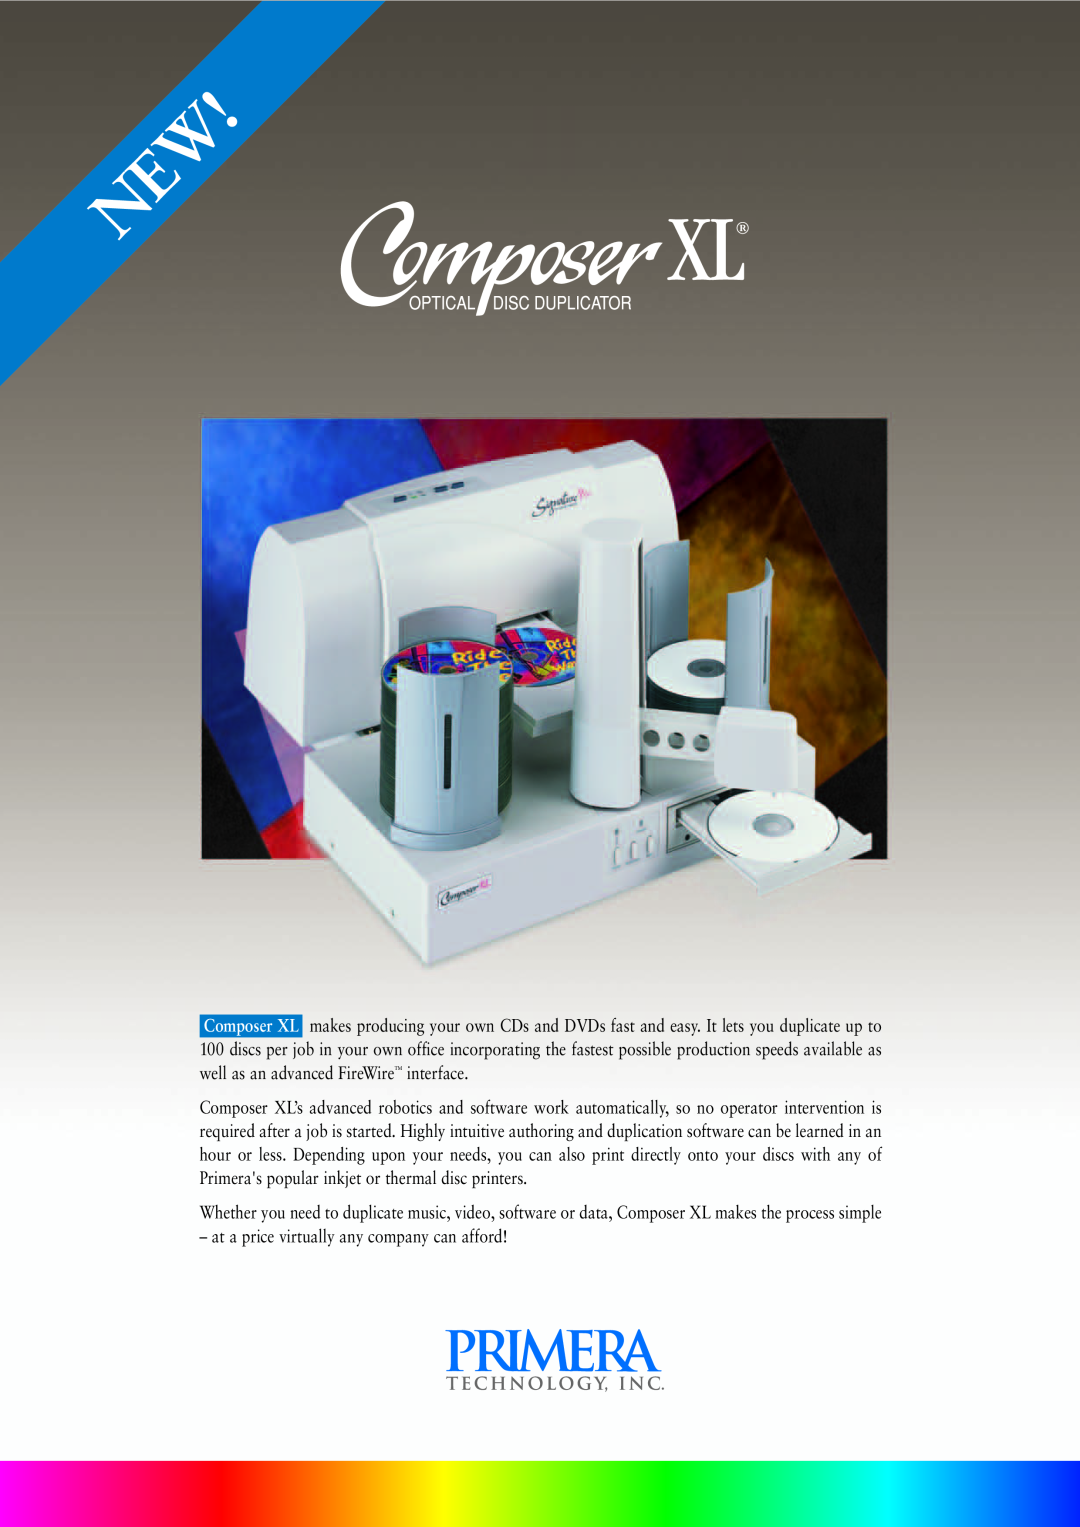 Primera Technology Composer XL manual at a price virtually any company can afford 